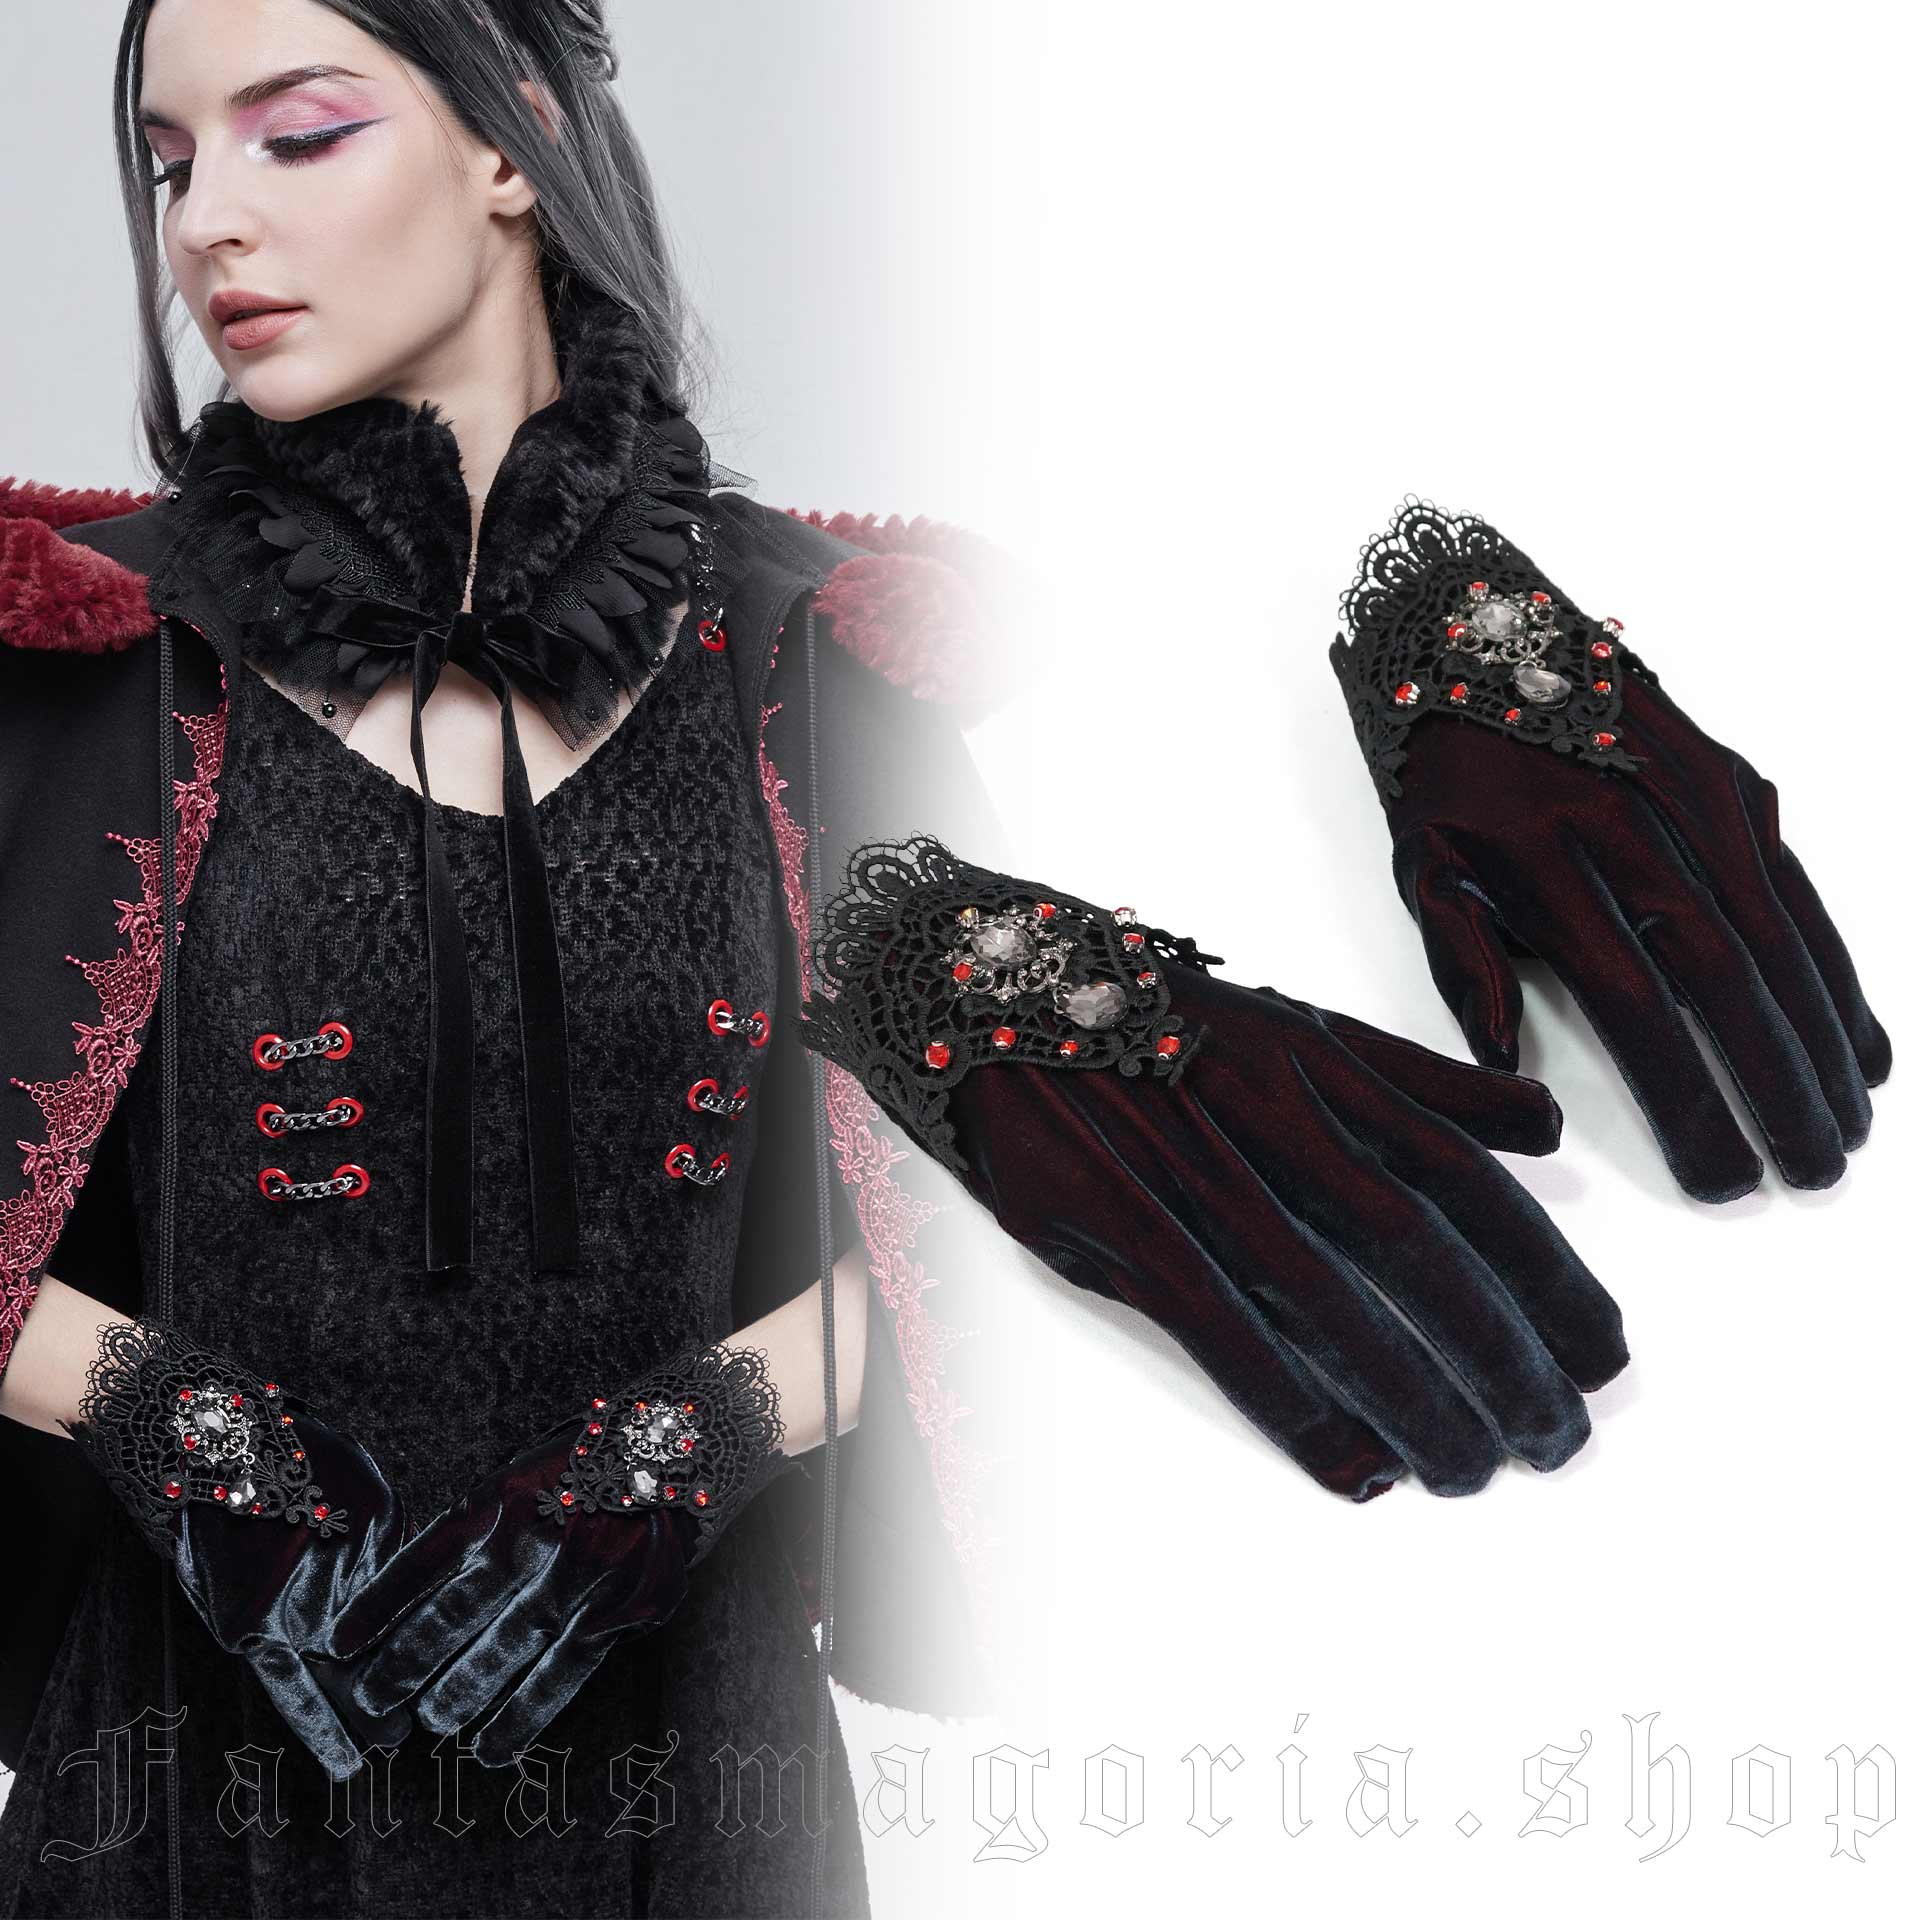 Vampire Corset and Gloves 